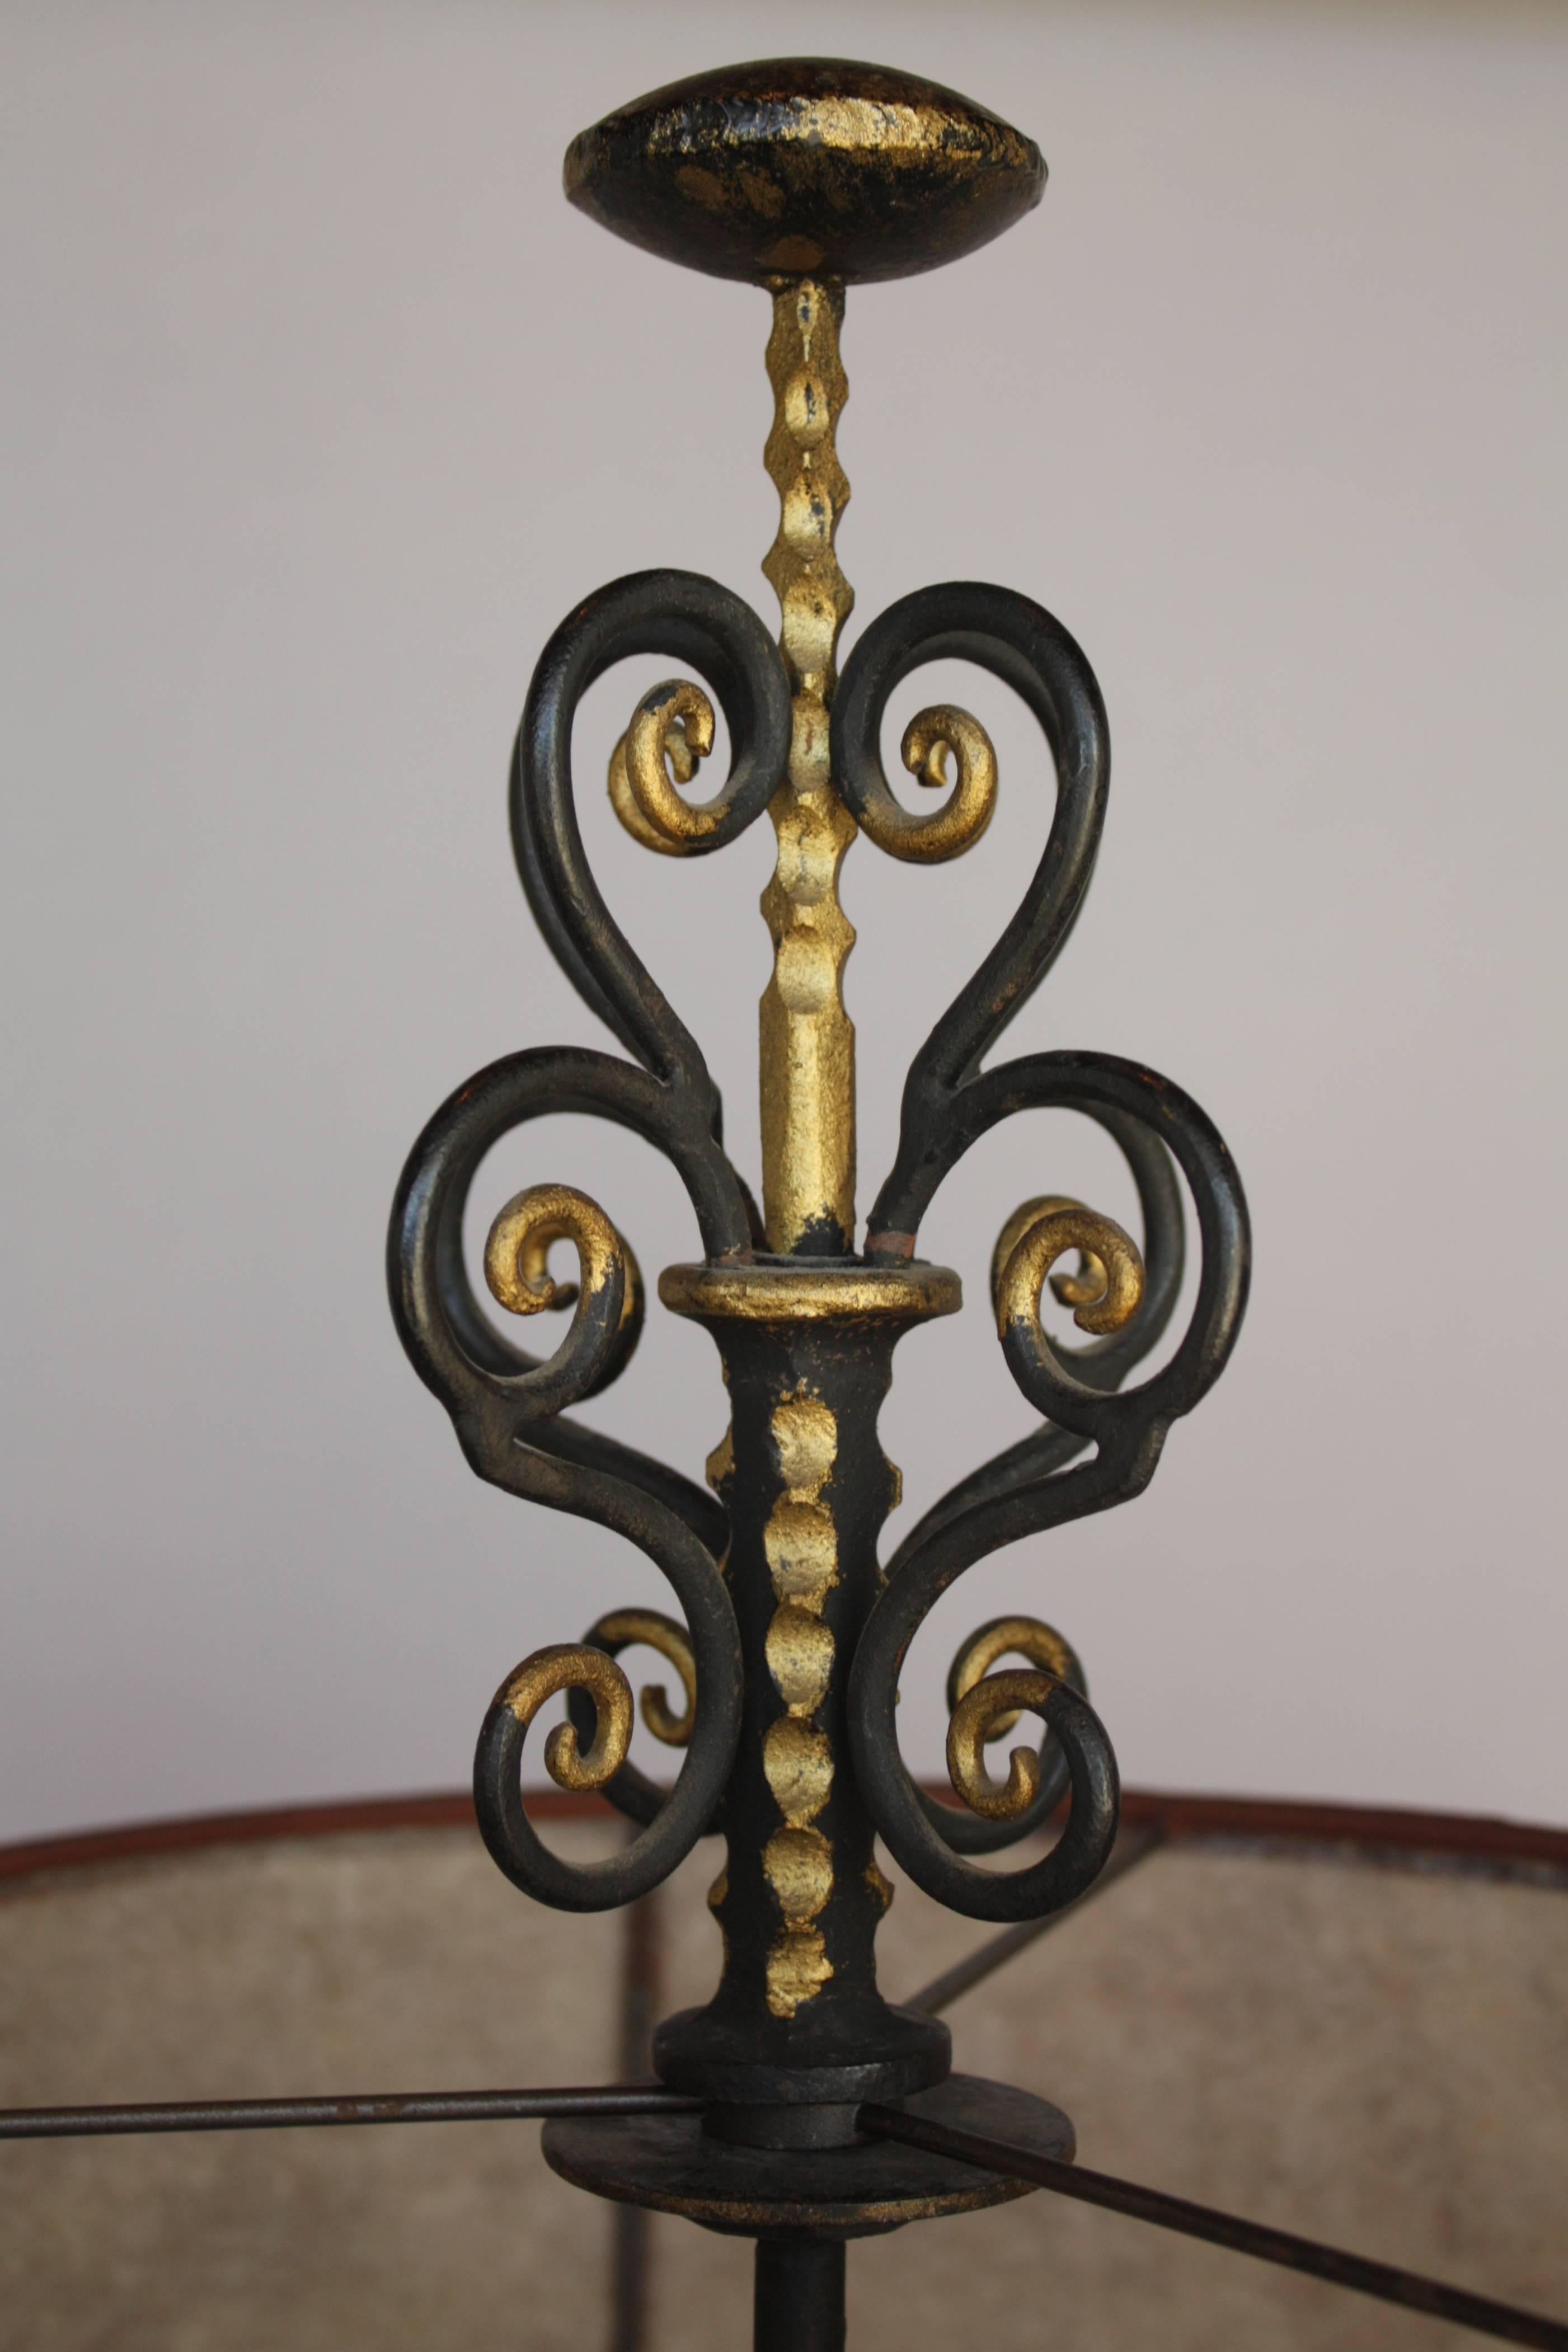 Early 20th Century Spectacular Large Scale 1920's Spanish Revival Floor Lamp